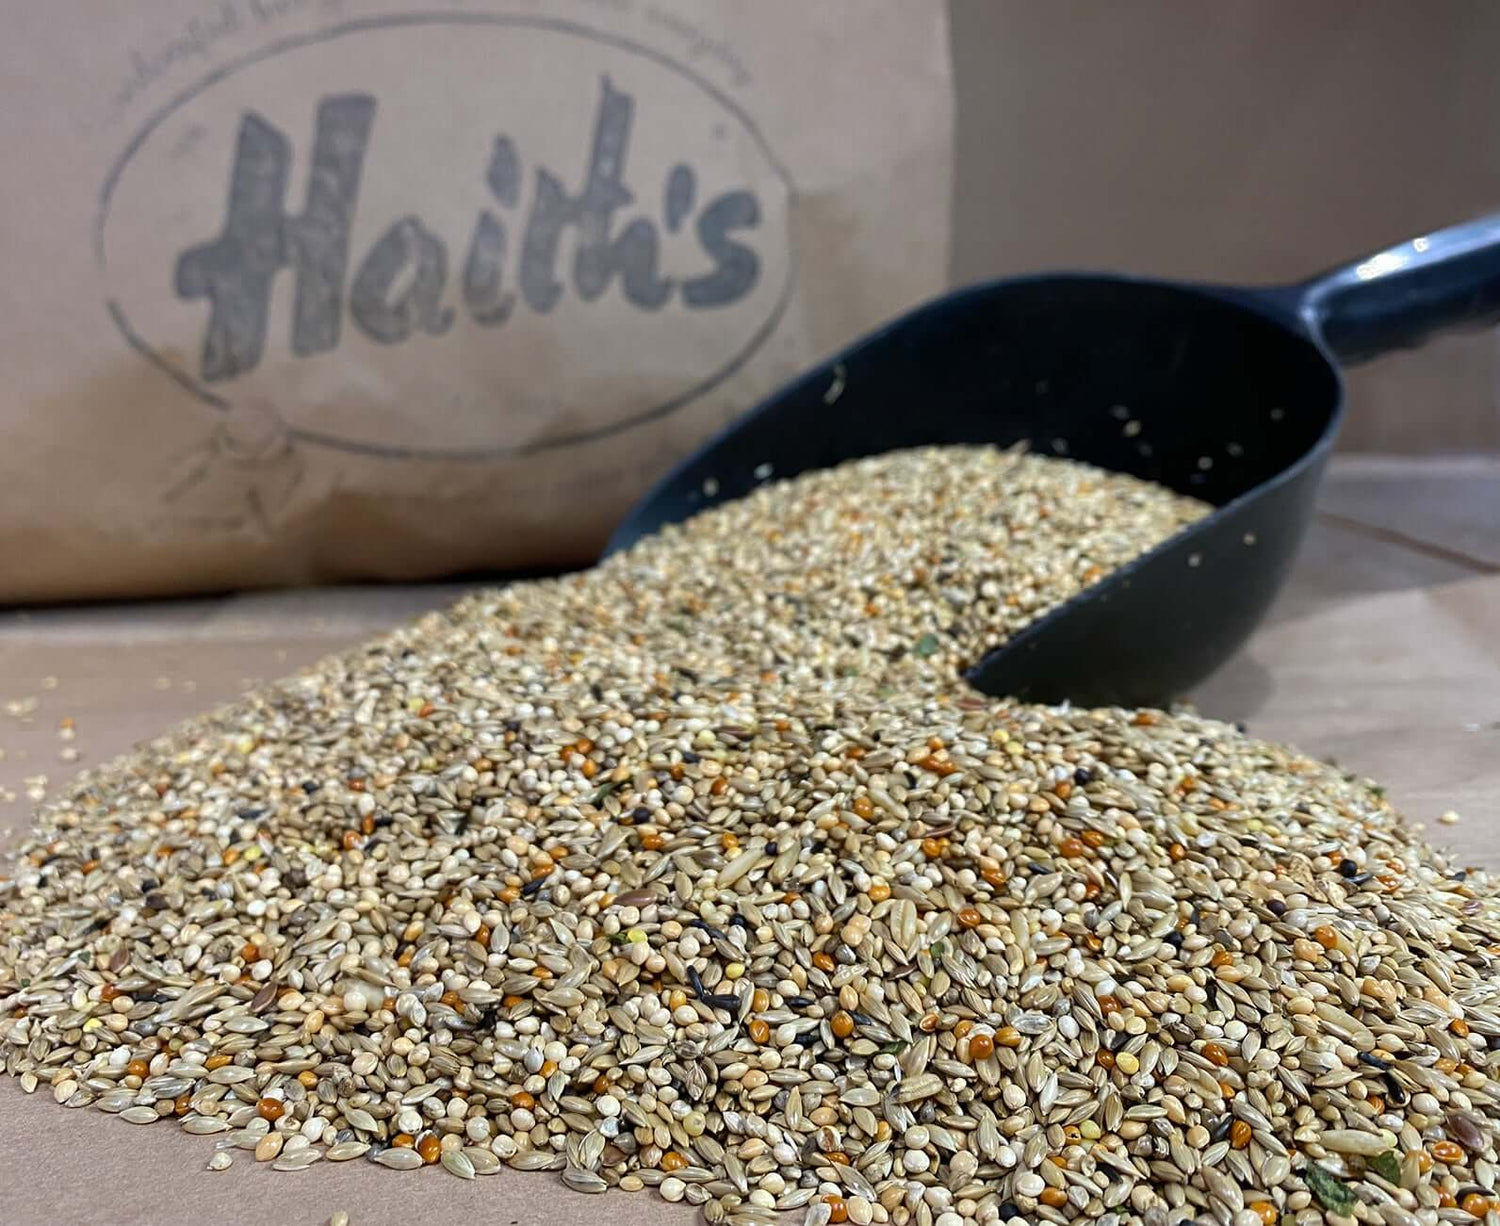 Chris Snell's blend uses only the finest quality ingredients, including red and white millet, naked oats, linseed and also Haith's Budgie Tonic.